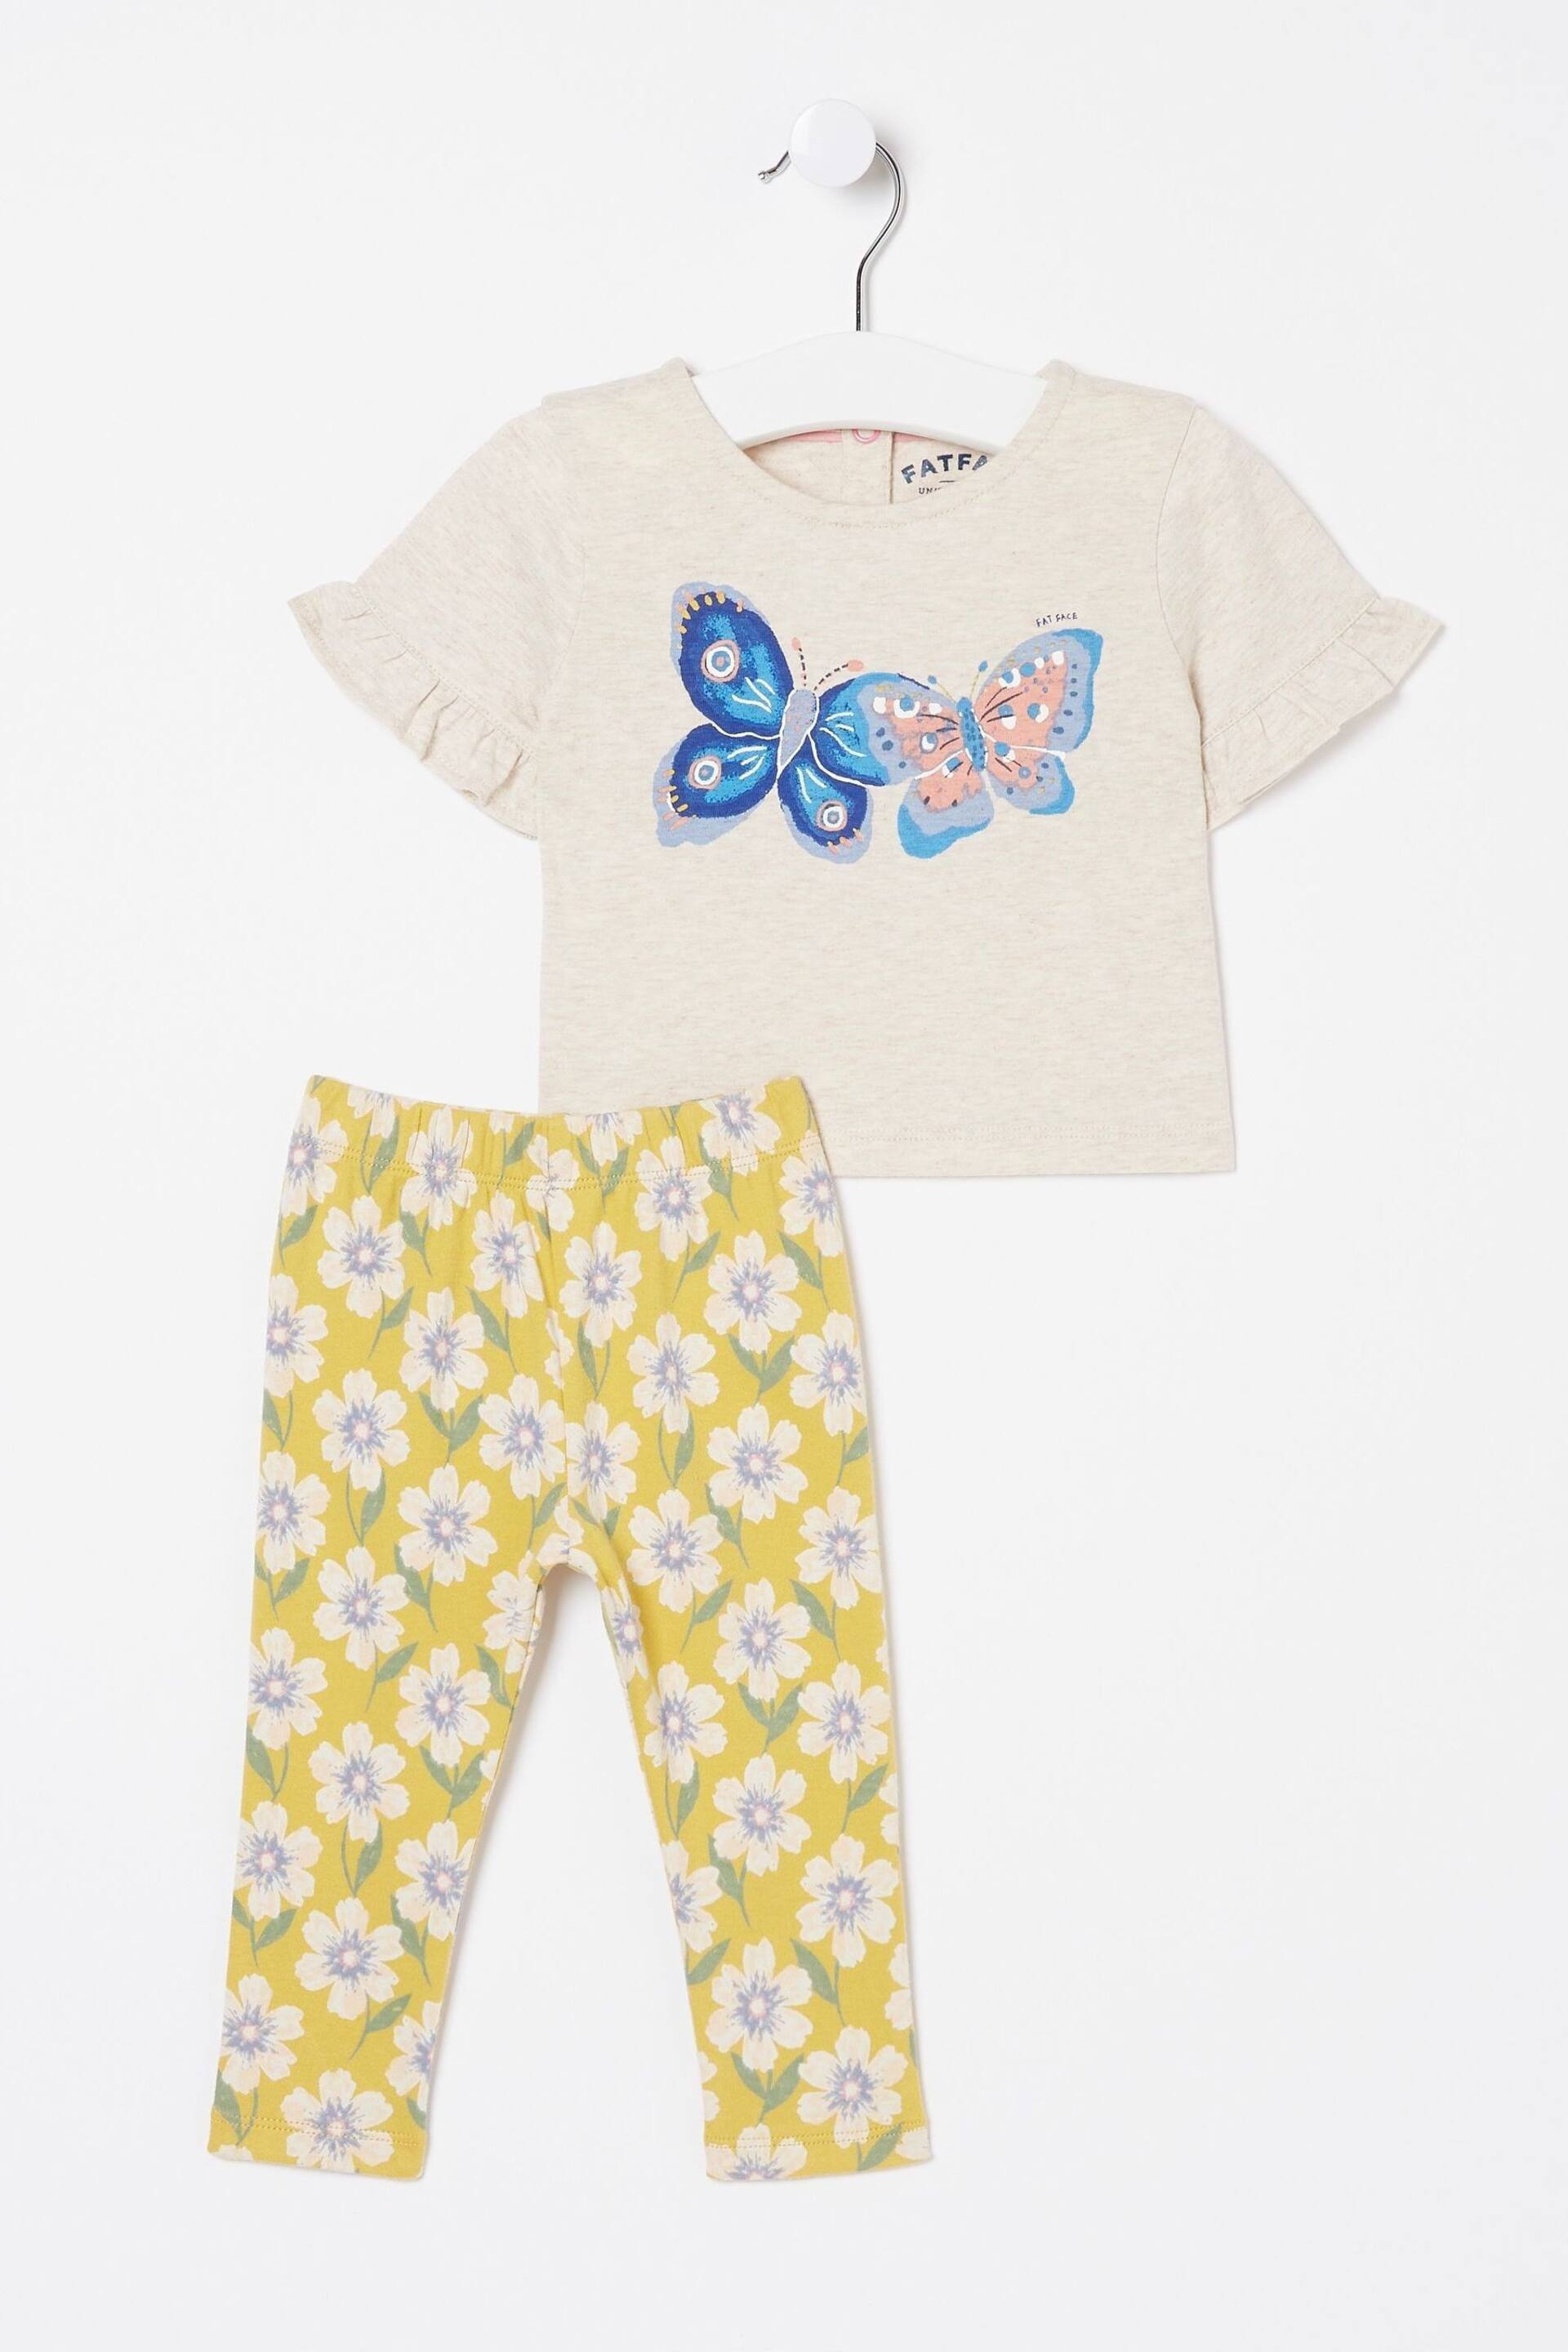 FatFace Natural Butterfly Graphic Leggings Set - Image 1 of 1